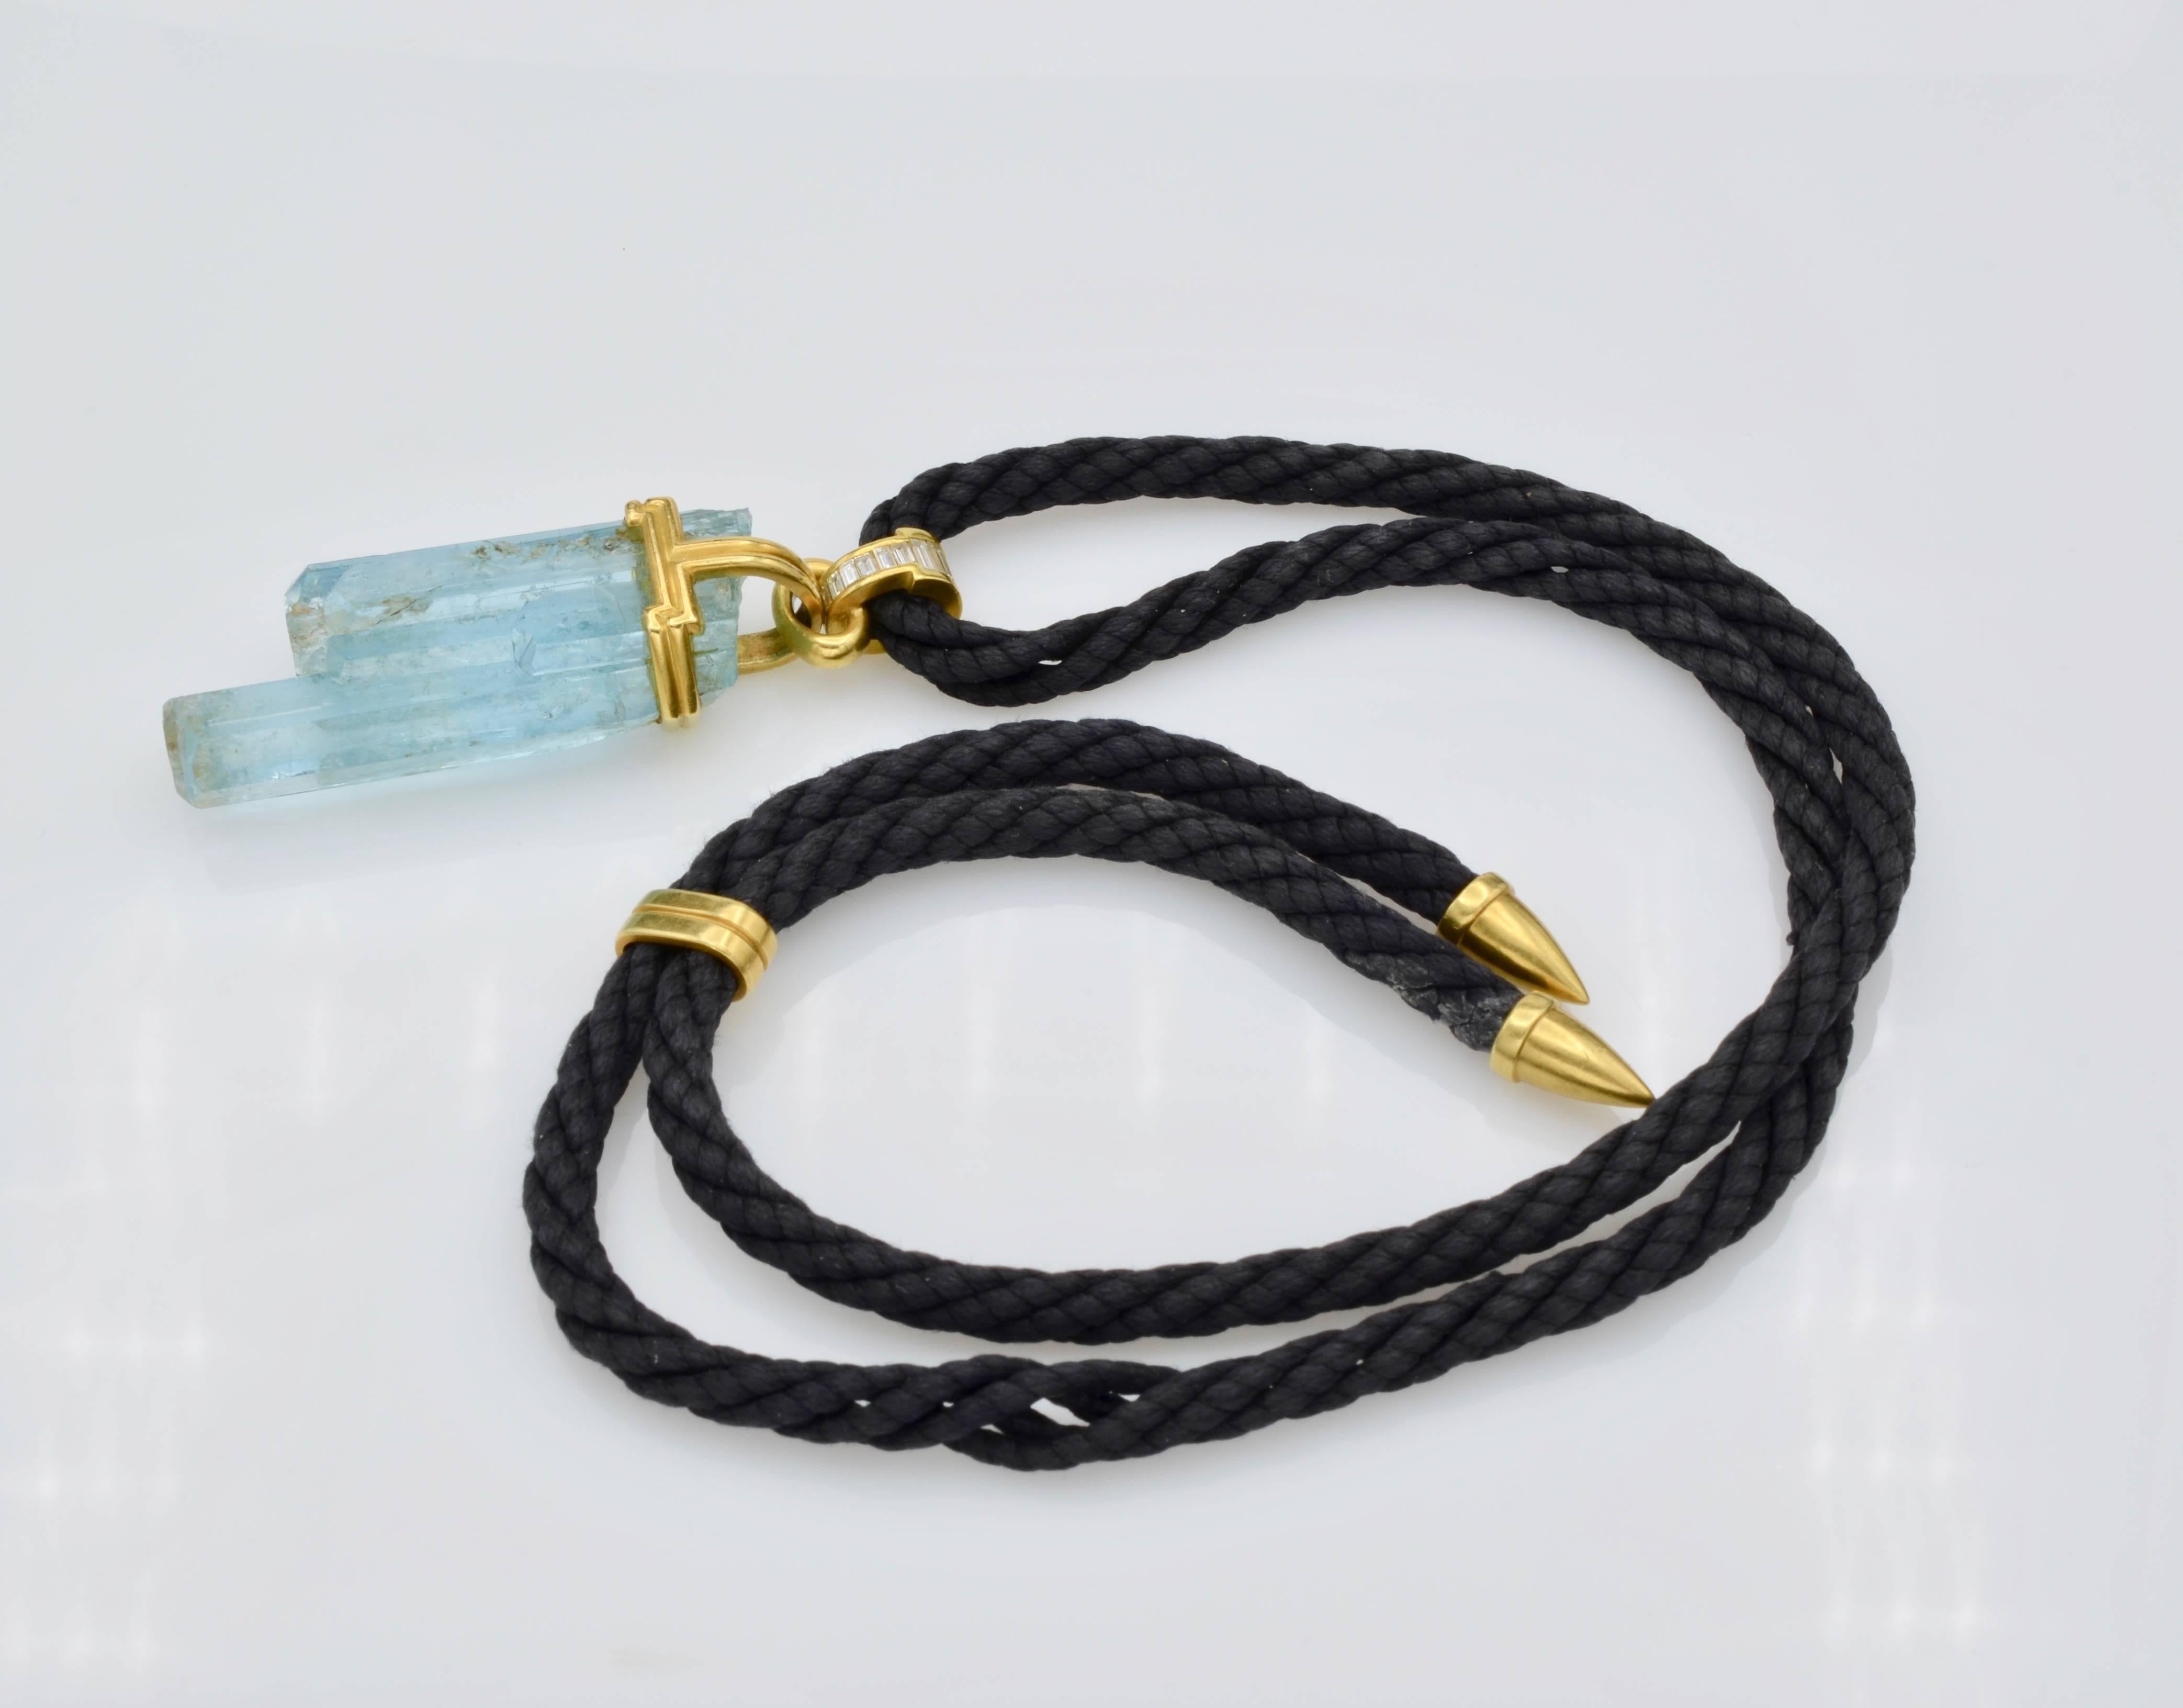 This gorgeous bright blue 1990's vintage organic aquamarine pendant necklace has over 1 carat of baguette diamonds in gold to sparkle and shine adding complimentary and contrasting style. Very modern and chic, a statment necklace to add a pop of